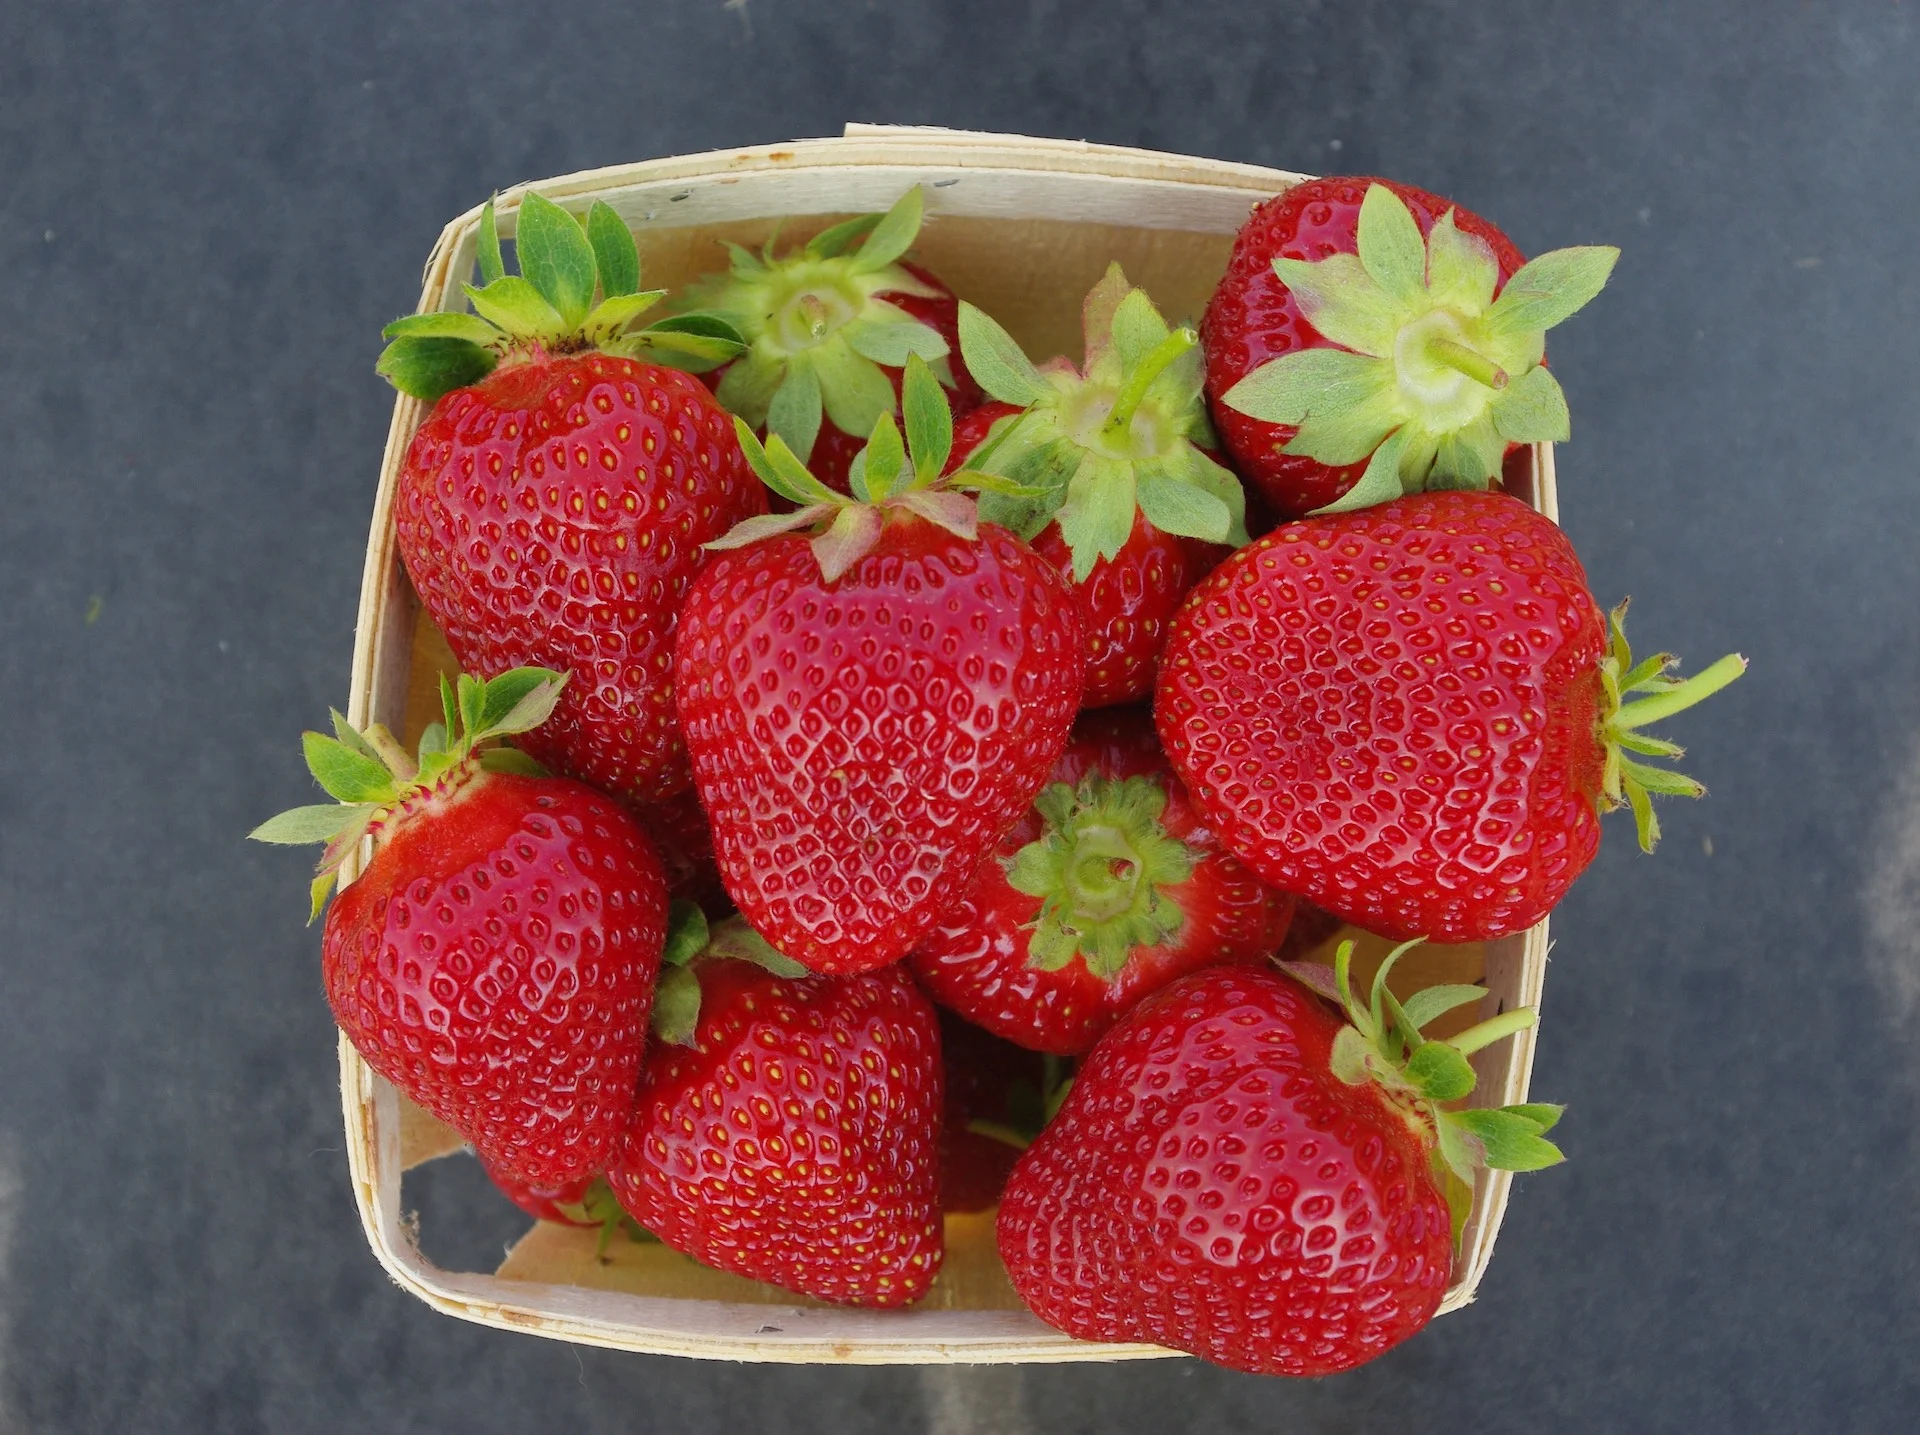 New strawberry types are guaranteed to sweeten your taste buds